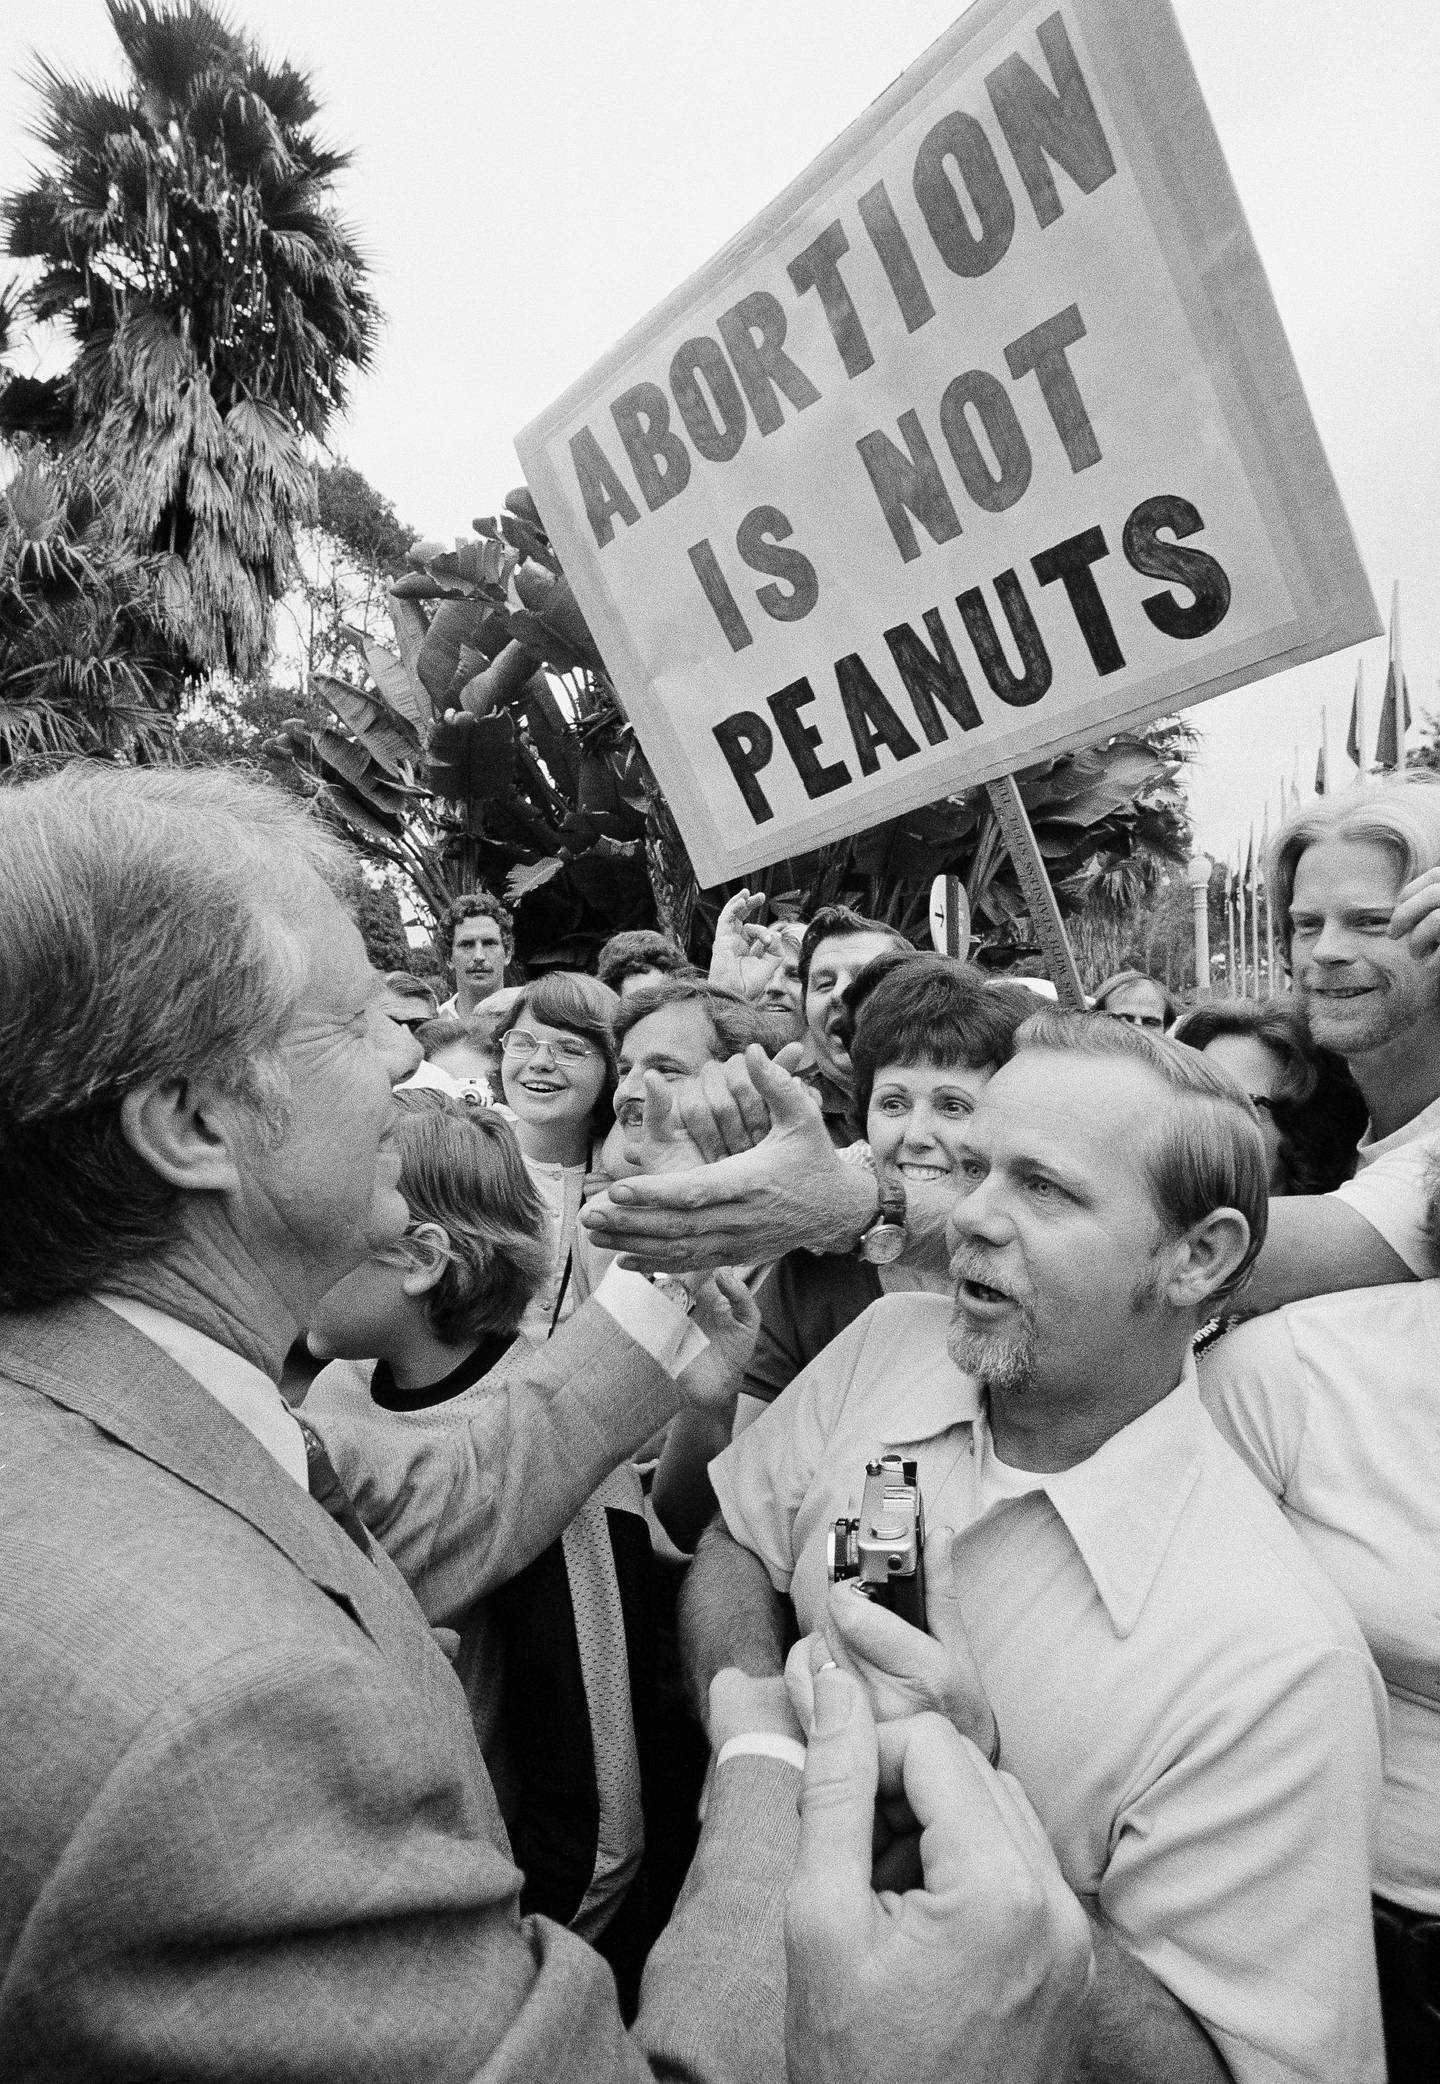 Jimmy Carter, on a brief campaign swing through Southern California, is stopped by a crowd outside the San Diego Zoo on Saturday, Sept. 25, 1976 before he made a short visit to zoo. Sign held up by someone in the crowd refers to one of the issues in the democratic platform. (AP Photo)